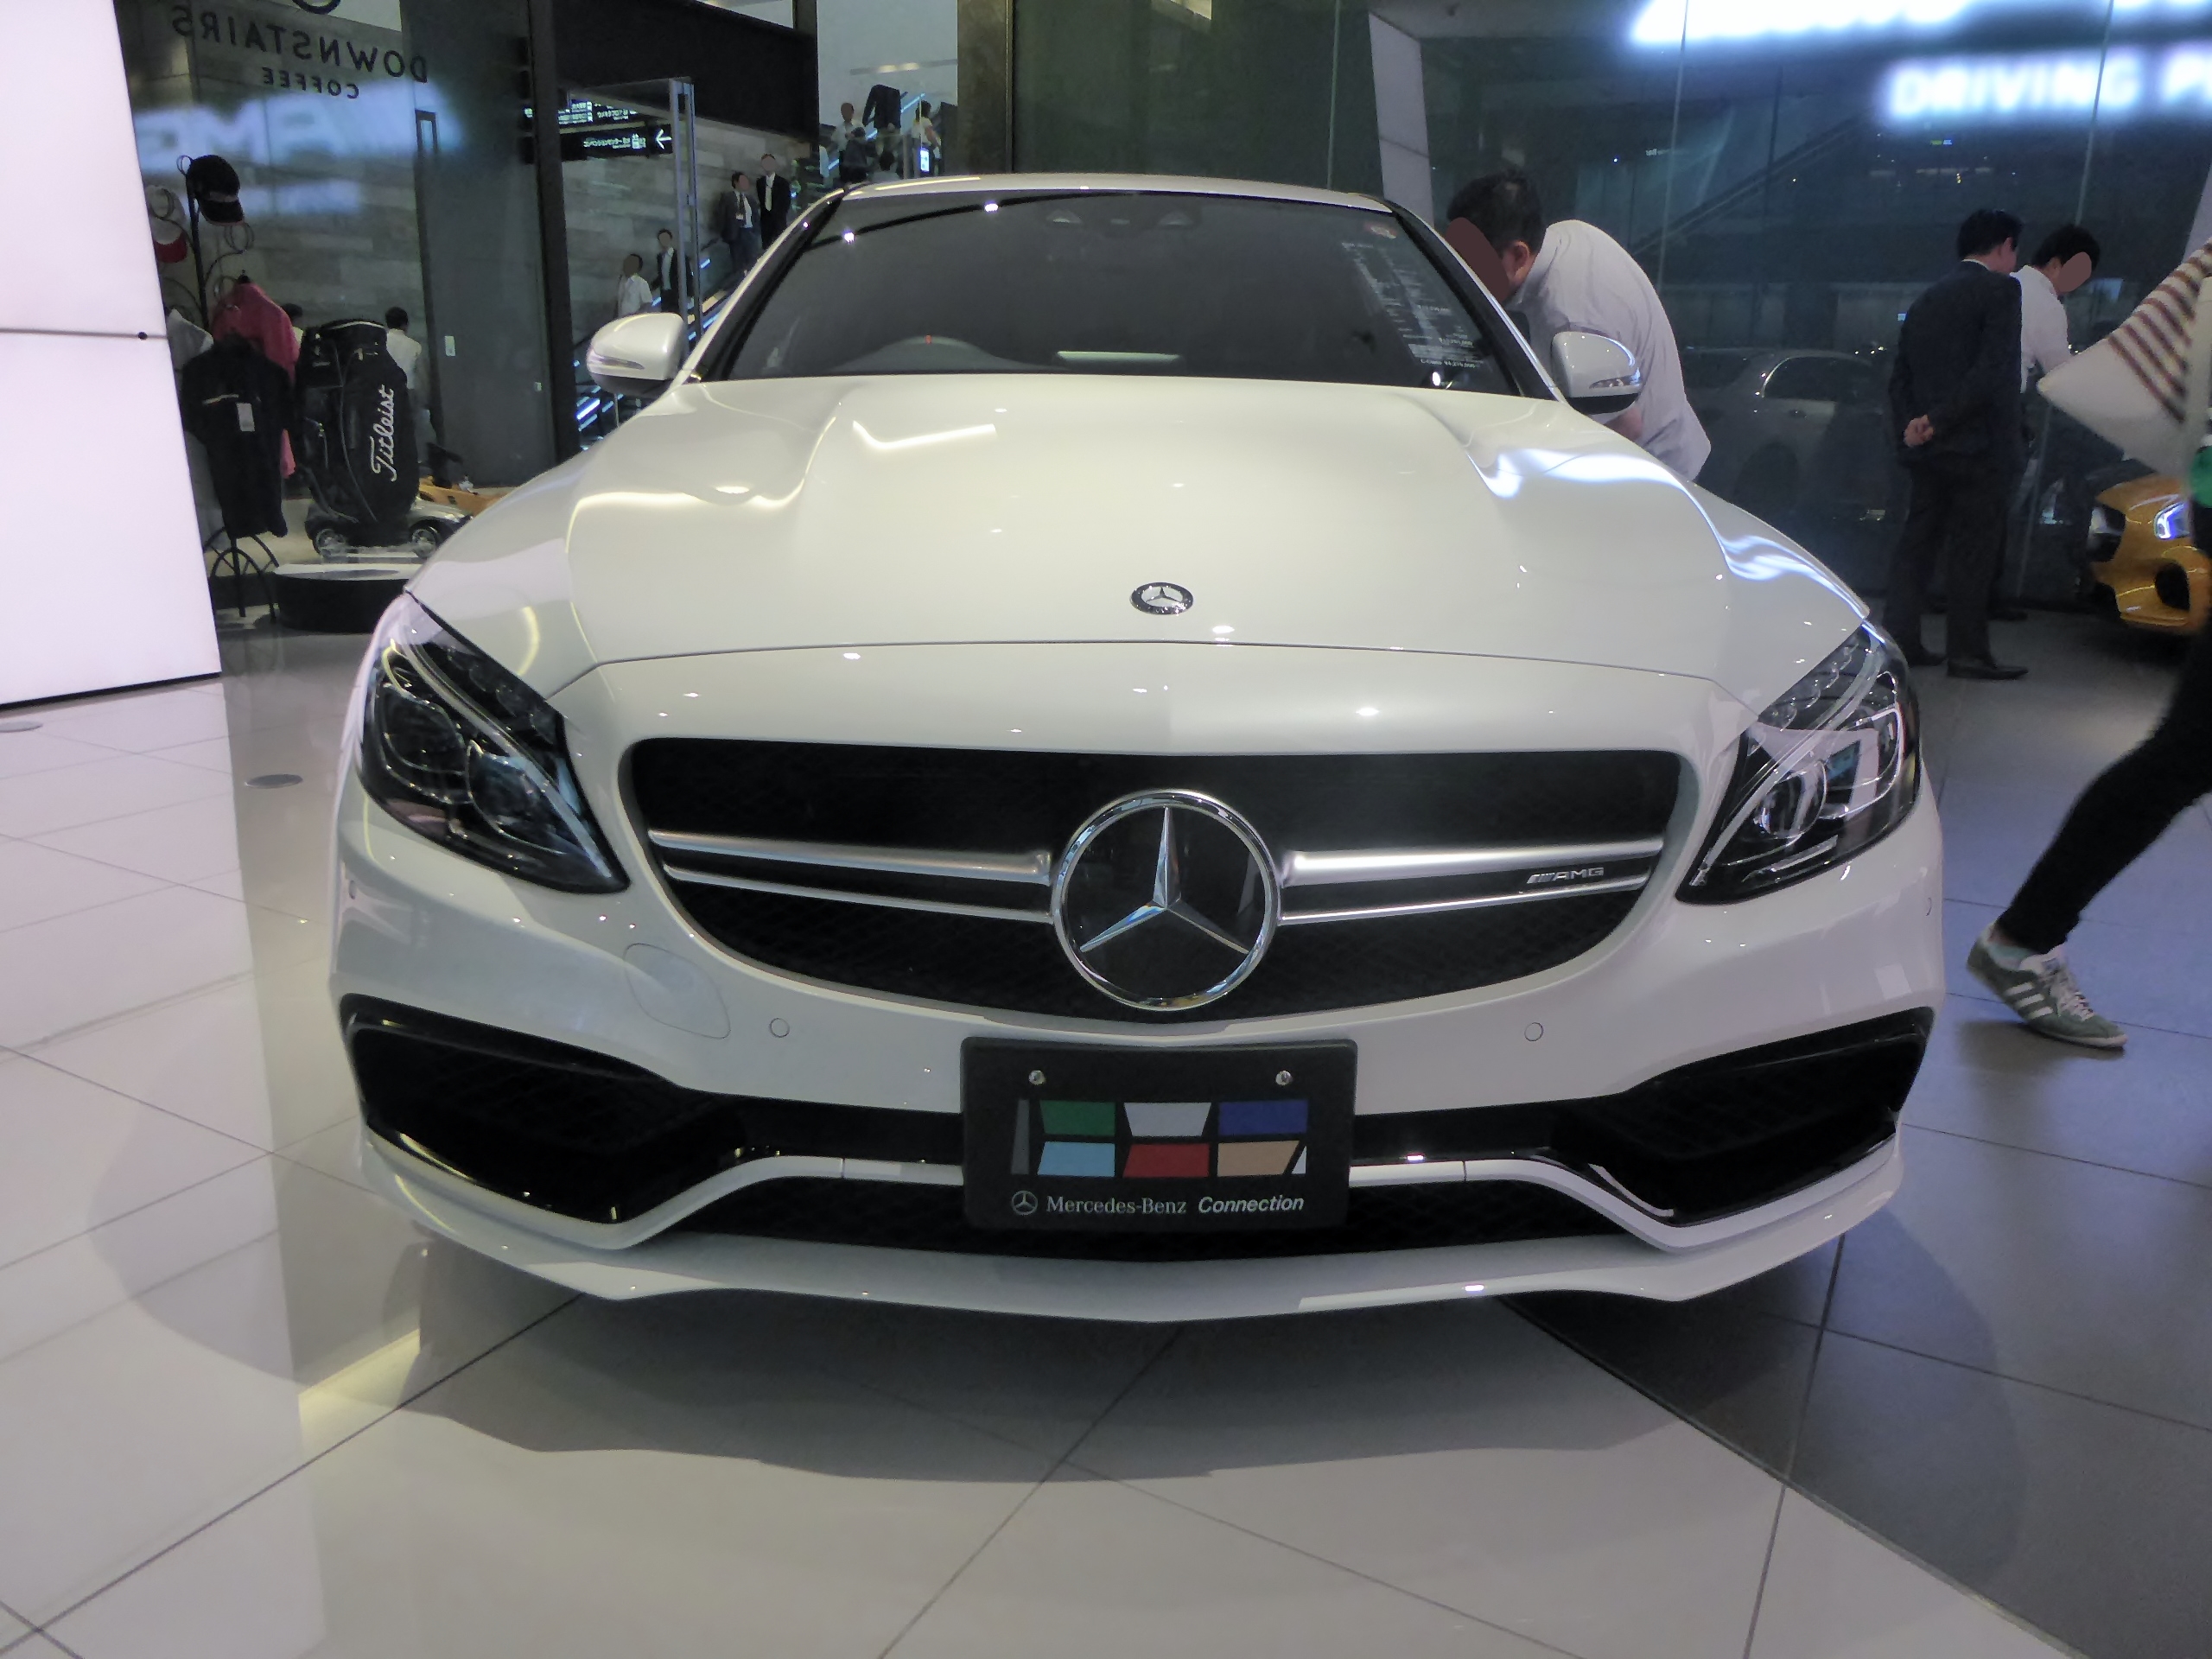 File:The frontview of Mercedes-AMG C63 S (W205).JPG - Wikimedia Commons